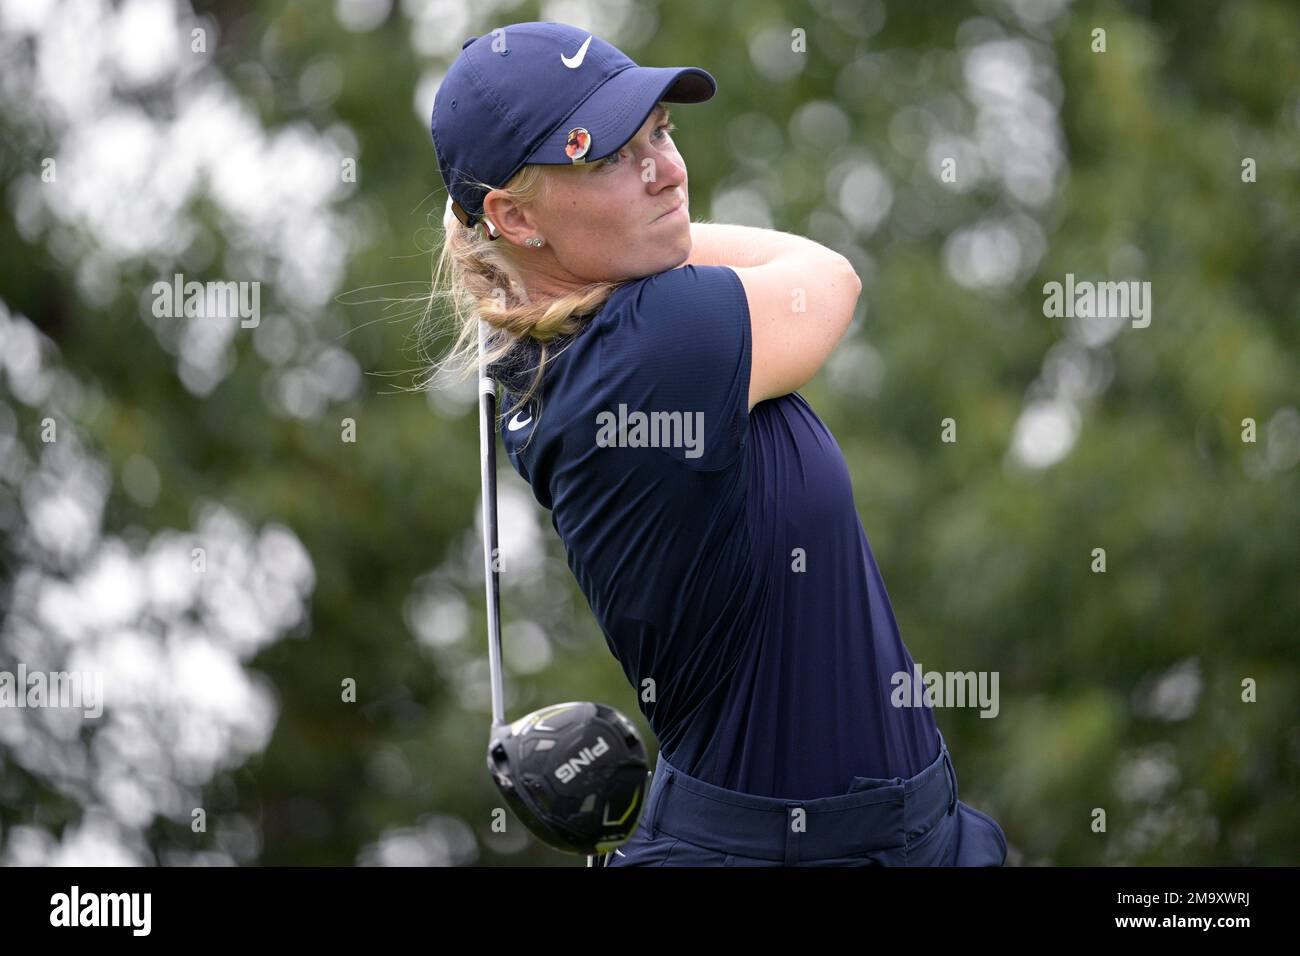 Frida Kinhult, of Sweden, watches her tee shot on the sixth hole during the  first round of the LPGA Pelican Women's Championship golf tournament at  Pelican Golf Club, Friday, Nov. 11, 2022,